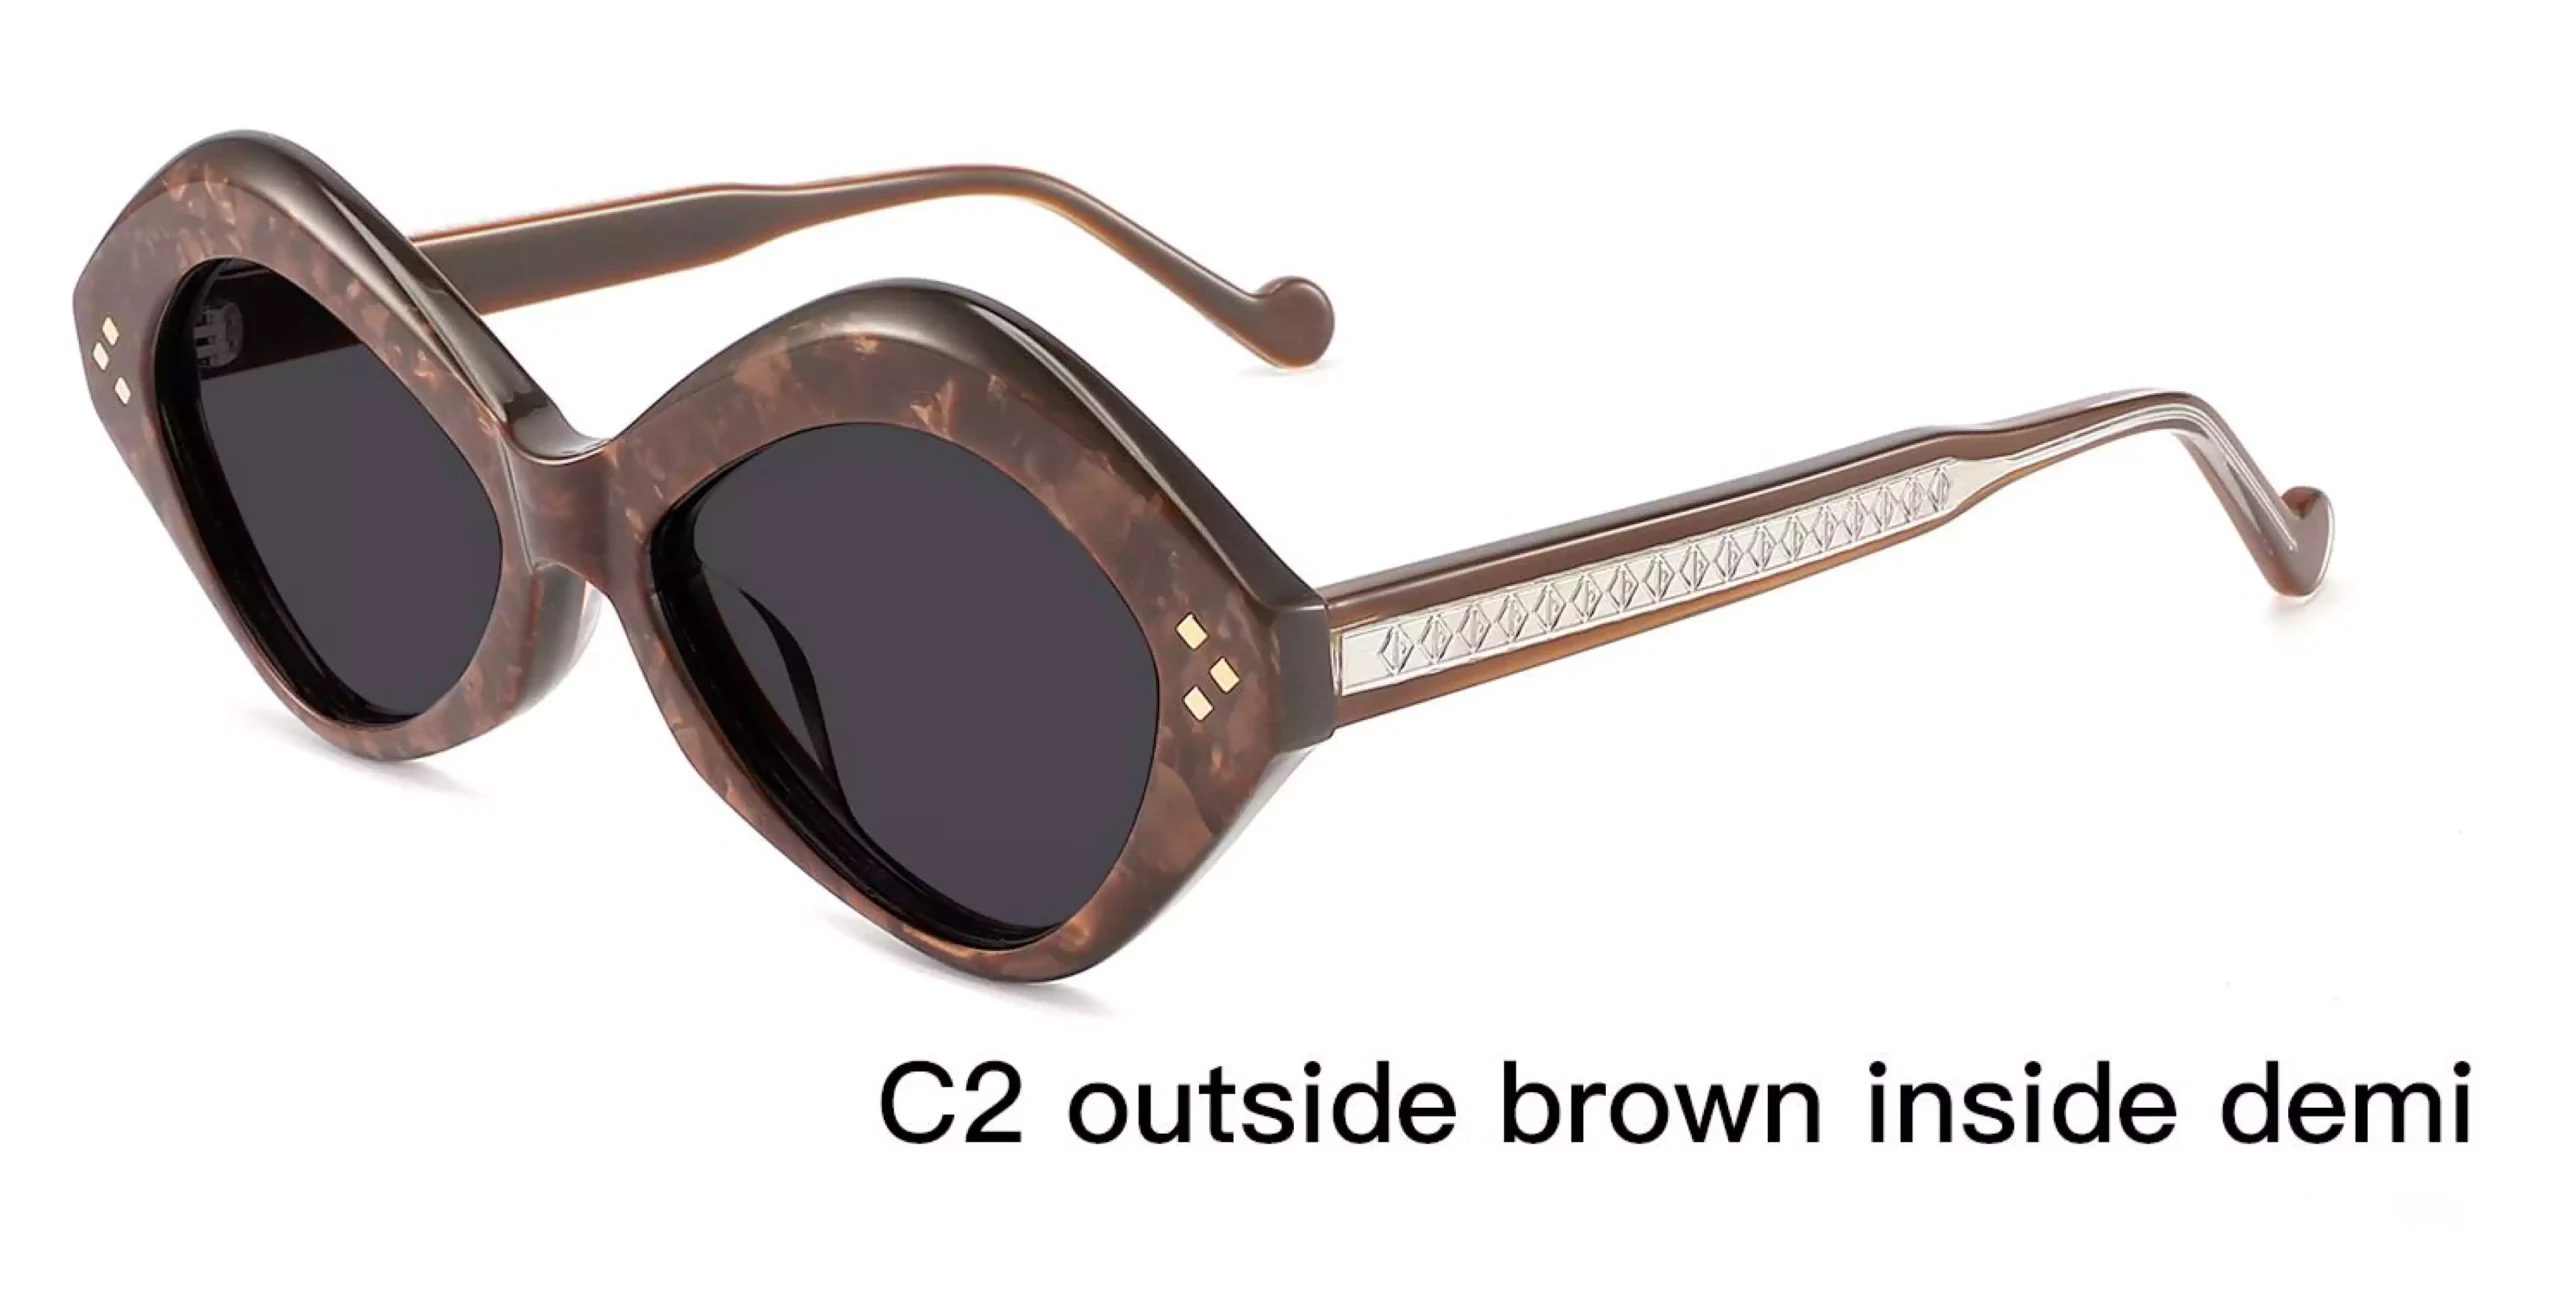 UV Protection Sunglasses Wholesale, Retro,Outside Brown, Inside Demi, laser engraved wire cores, UV protection, acetate, care vision